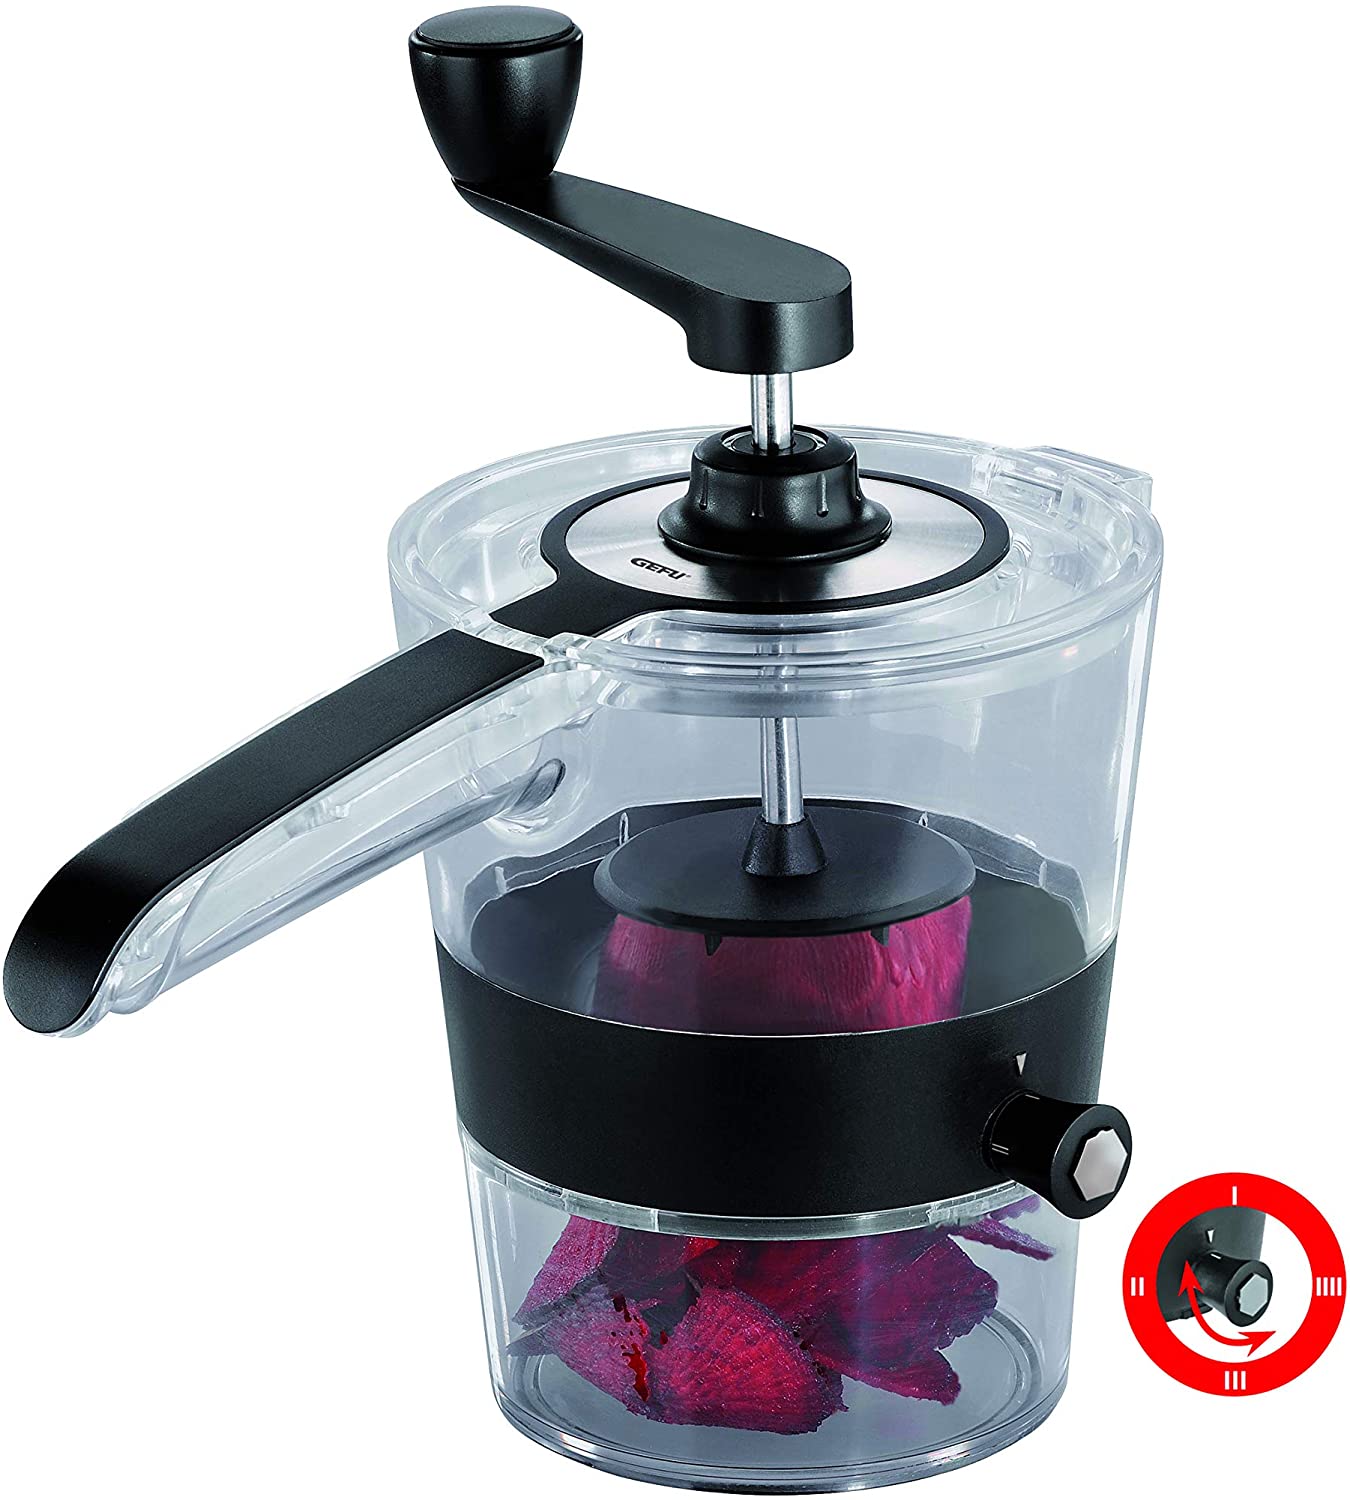 GEFU Spiral Cutter 13410 - Delicious Vegetable Spaghetti in no time at all